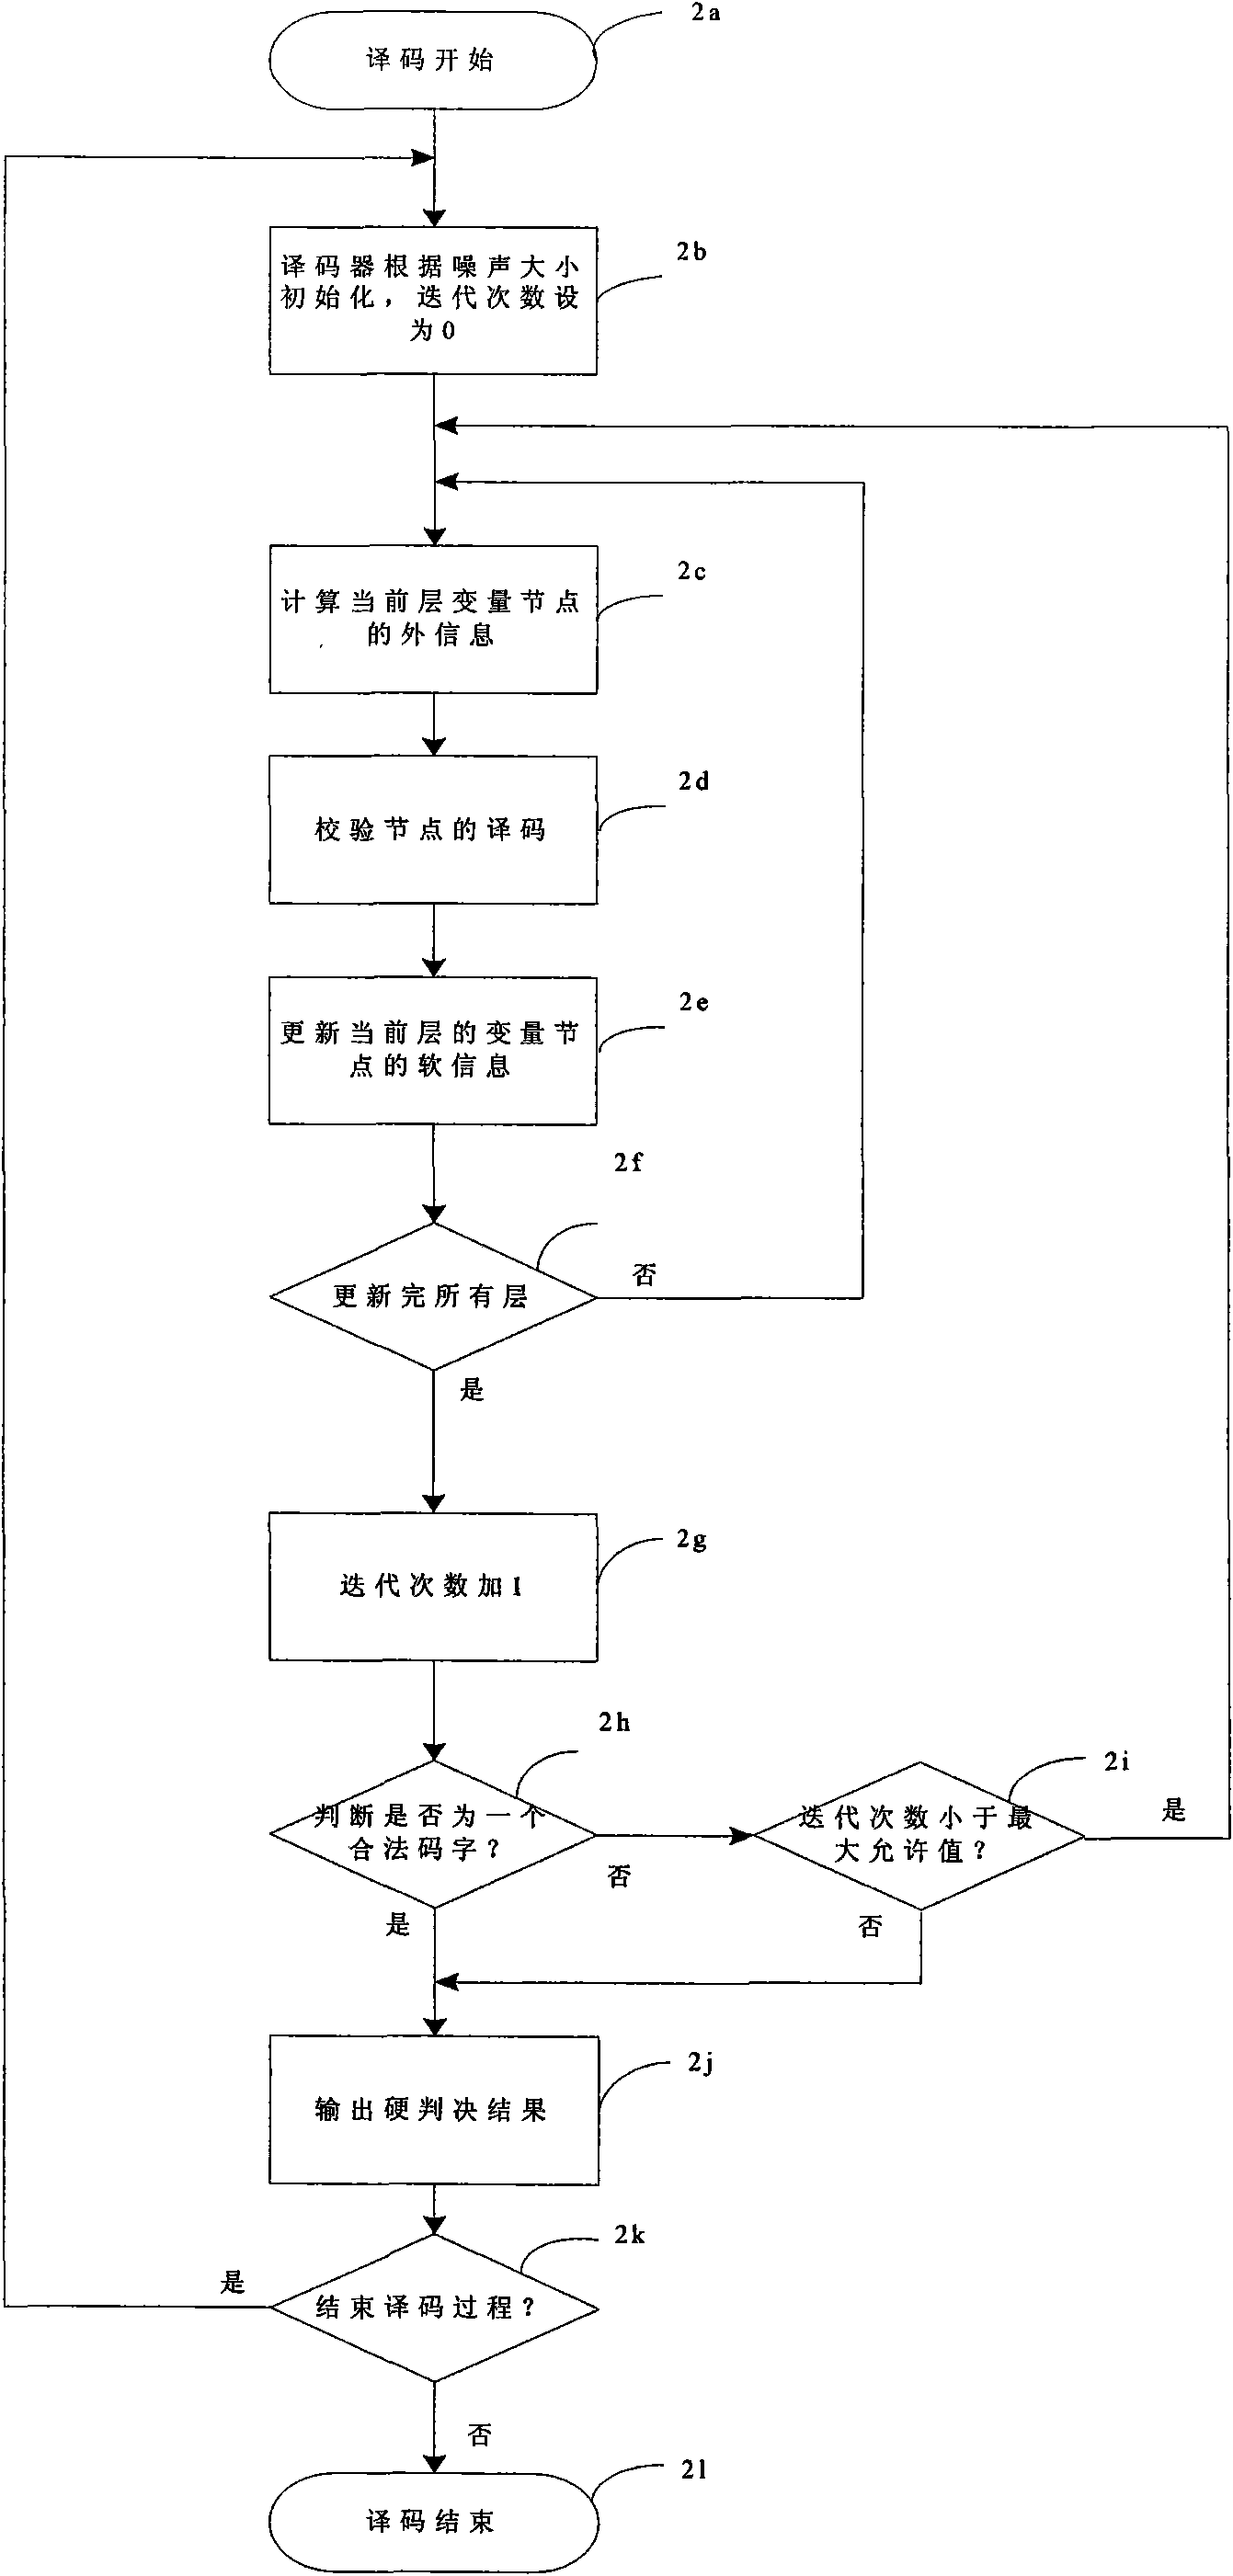 Fast convergence decoding algorithm for LDPC codes